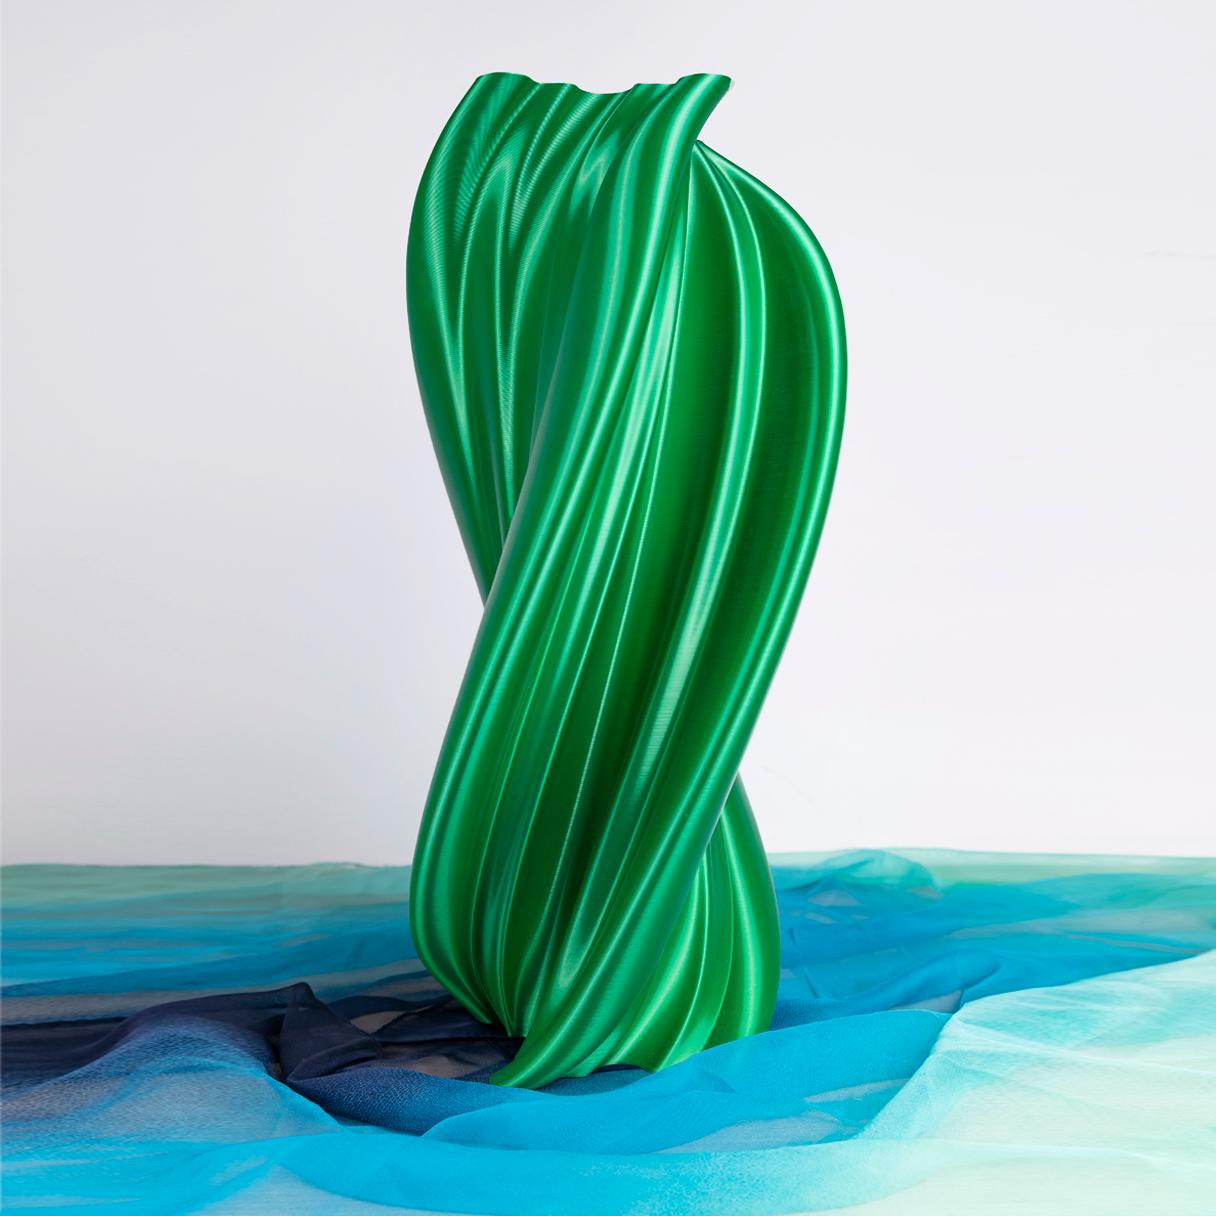 Resin Damocle, Green Contemporary Sustainable Vase-Sculpture For Sale